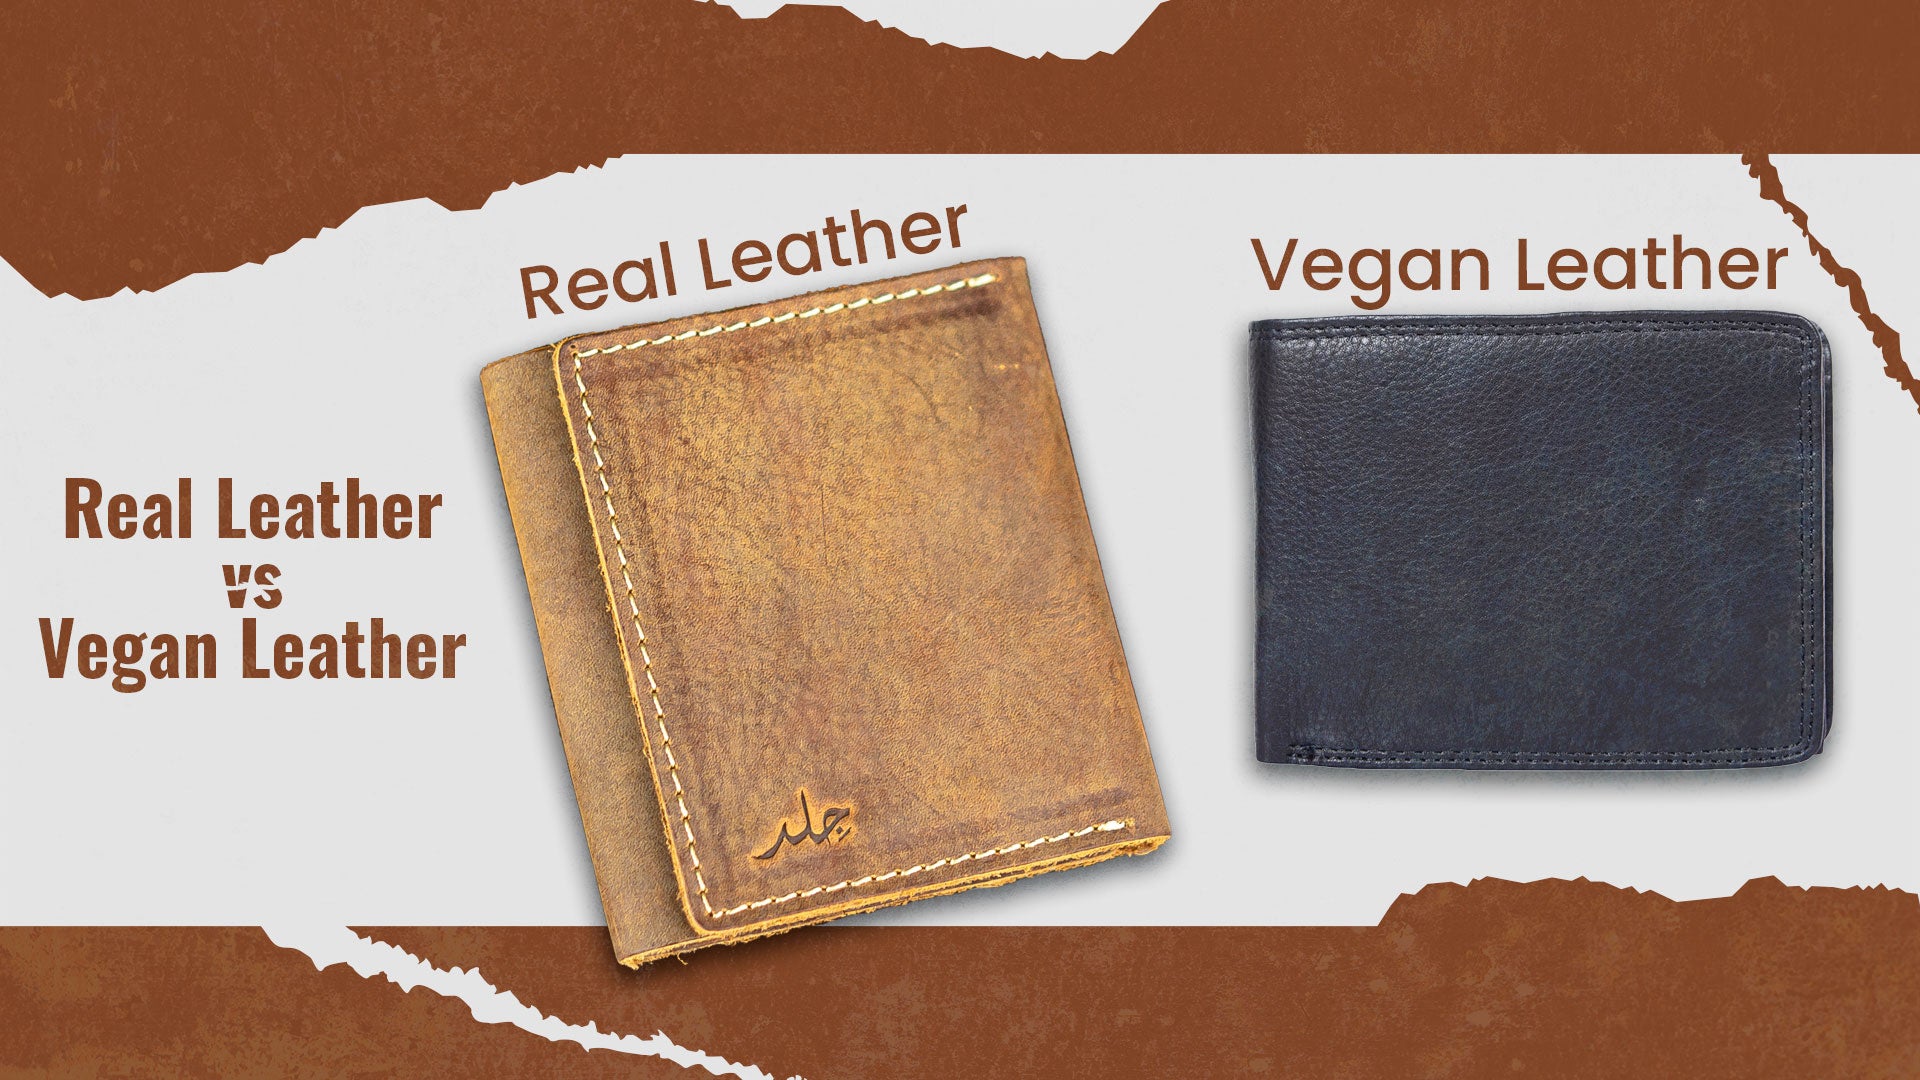 7 Differences Between Vegan Leather vs Real Leather